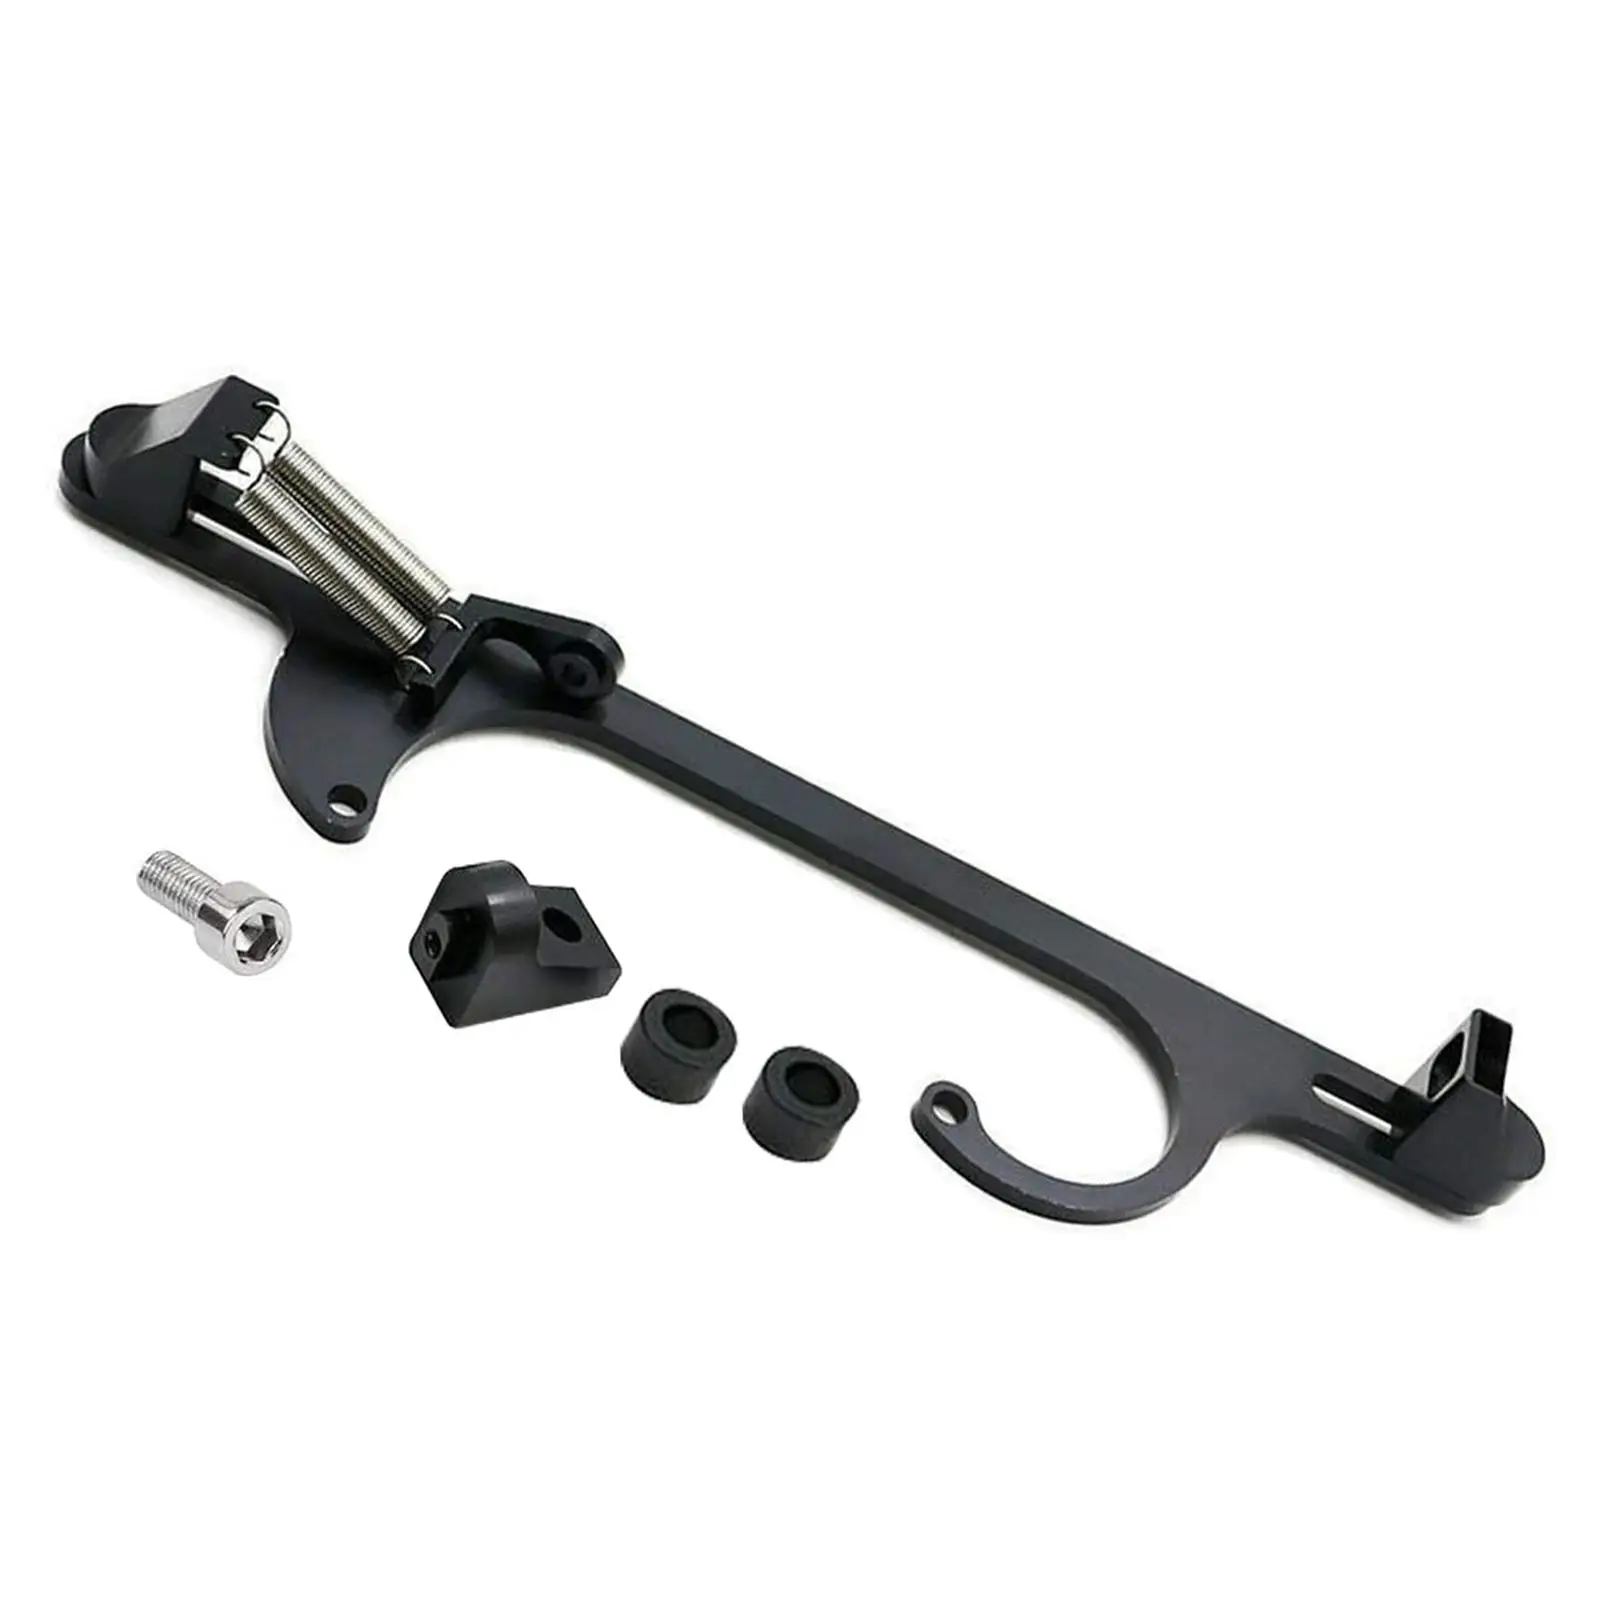 Auto Throttle Brackets 4150 4160 Replace Fuel System Aluminum Adjustable Fit for Toyota Corolla 1.6L 6.5L Carb 307 350 6.2L